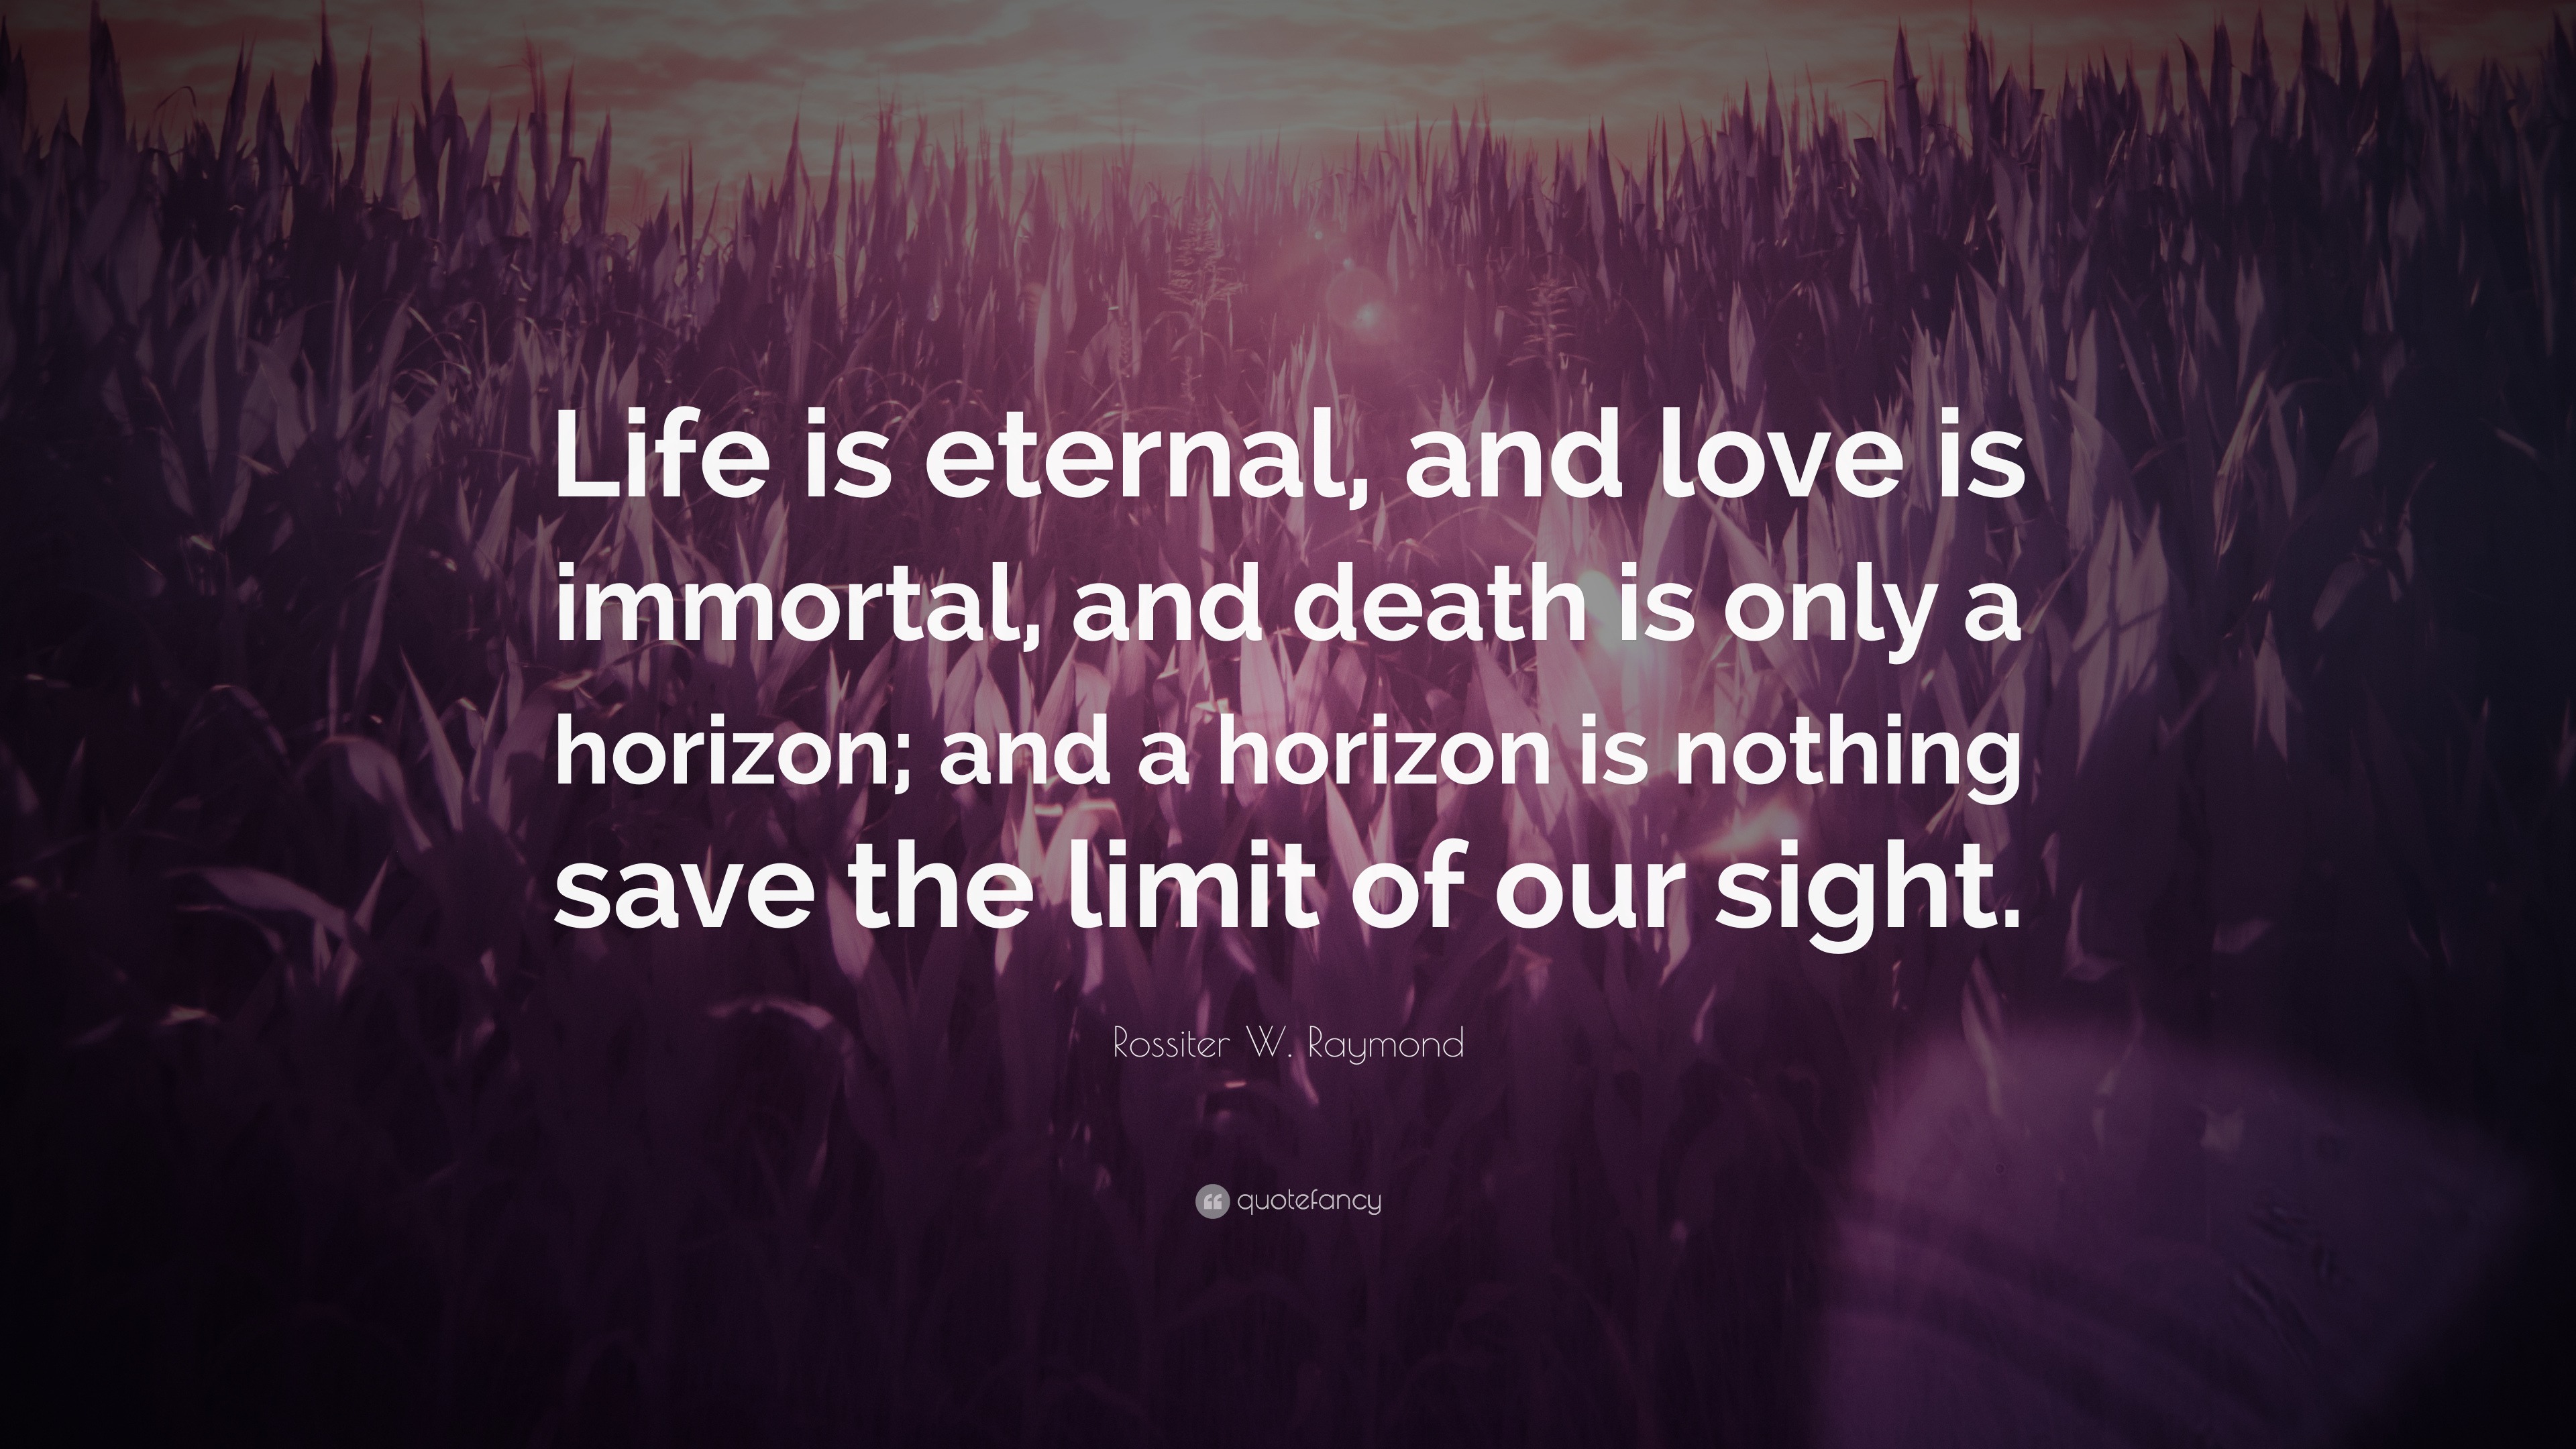 Rossiter W Raymond Quote “Life is eternal and love is immortal